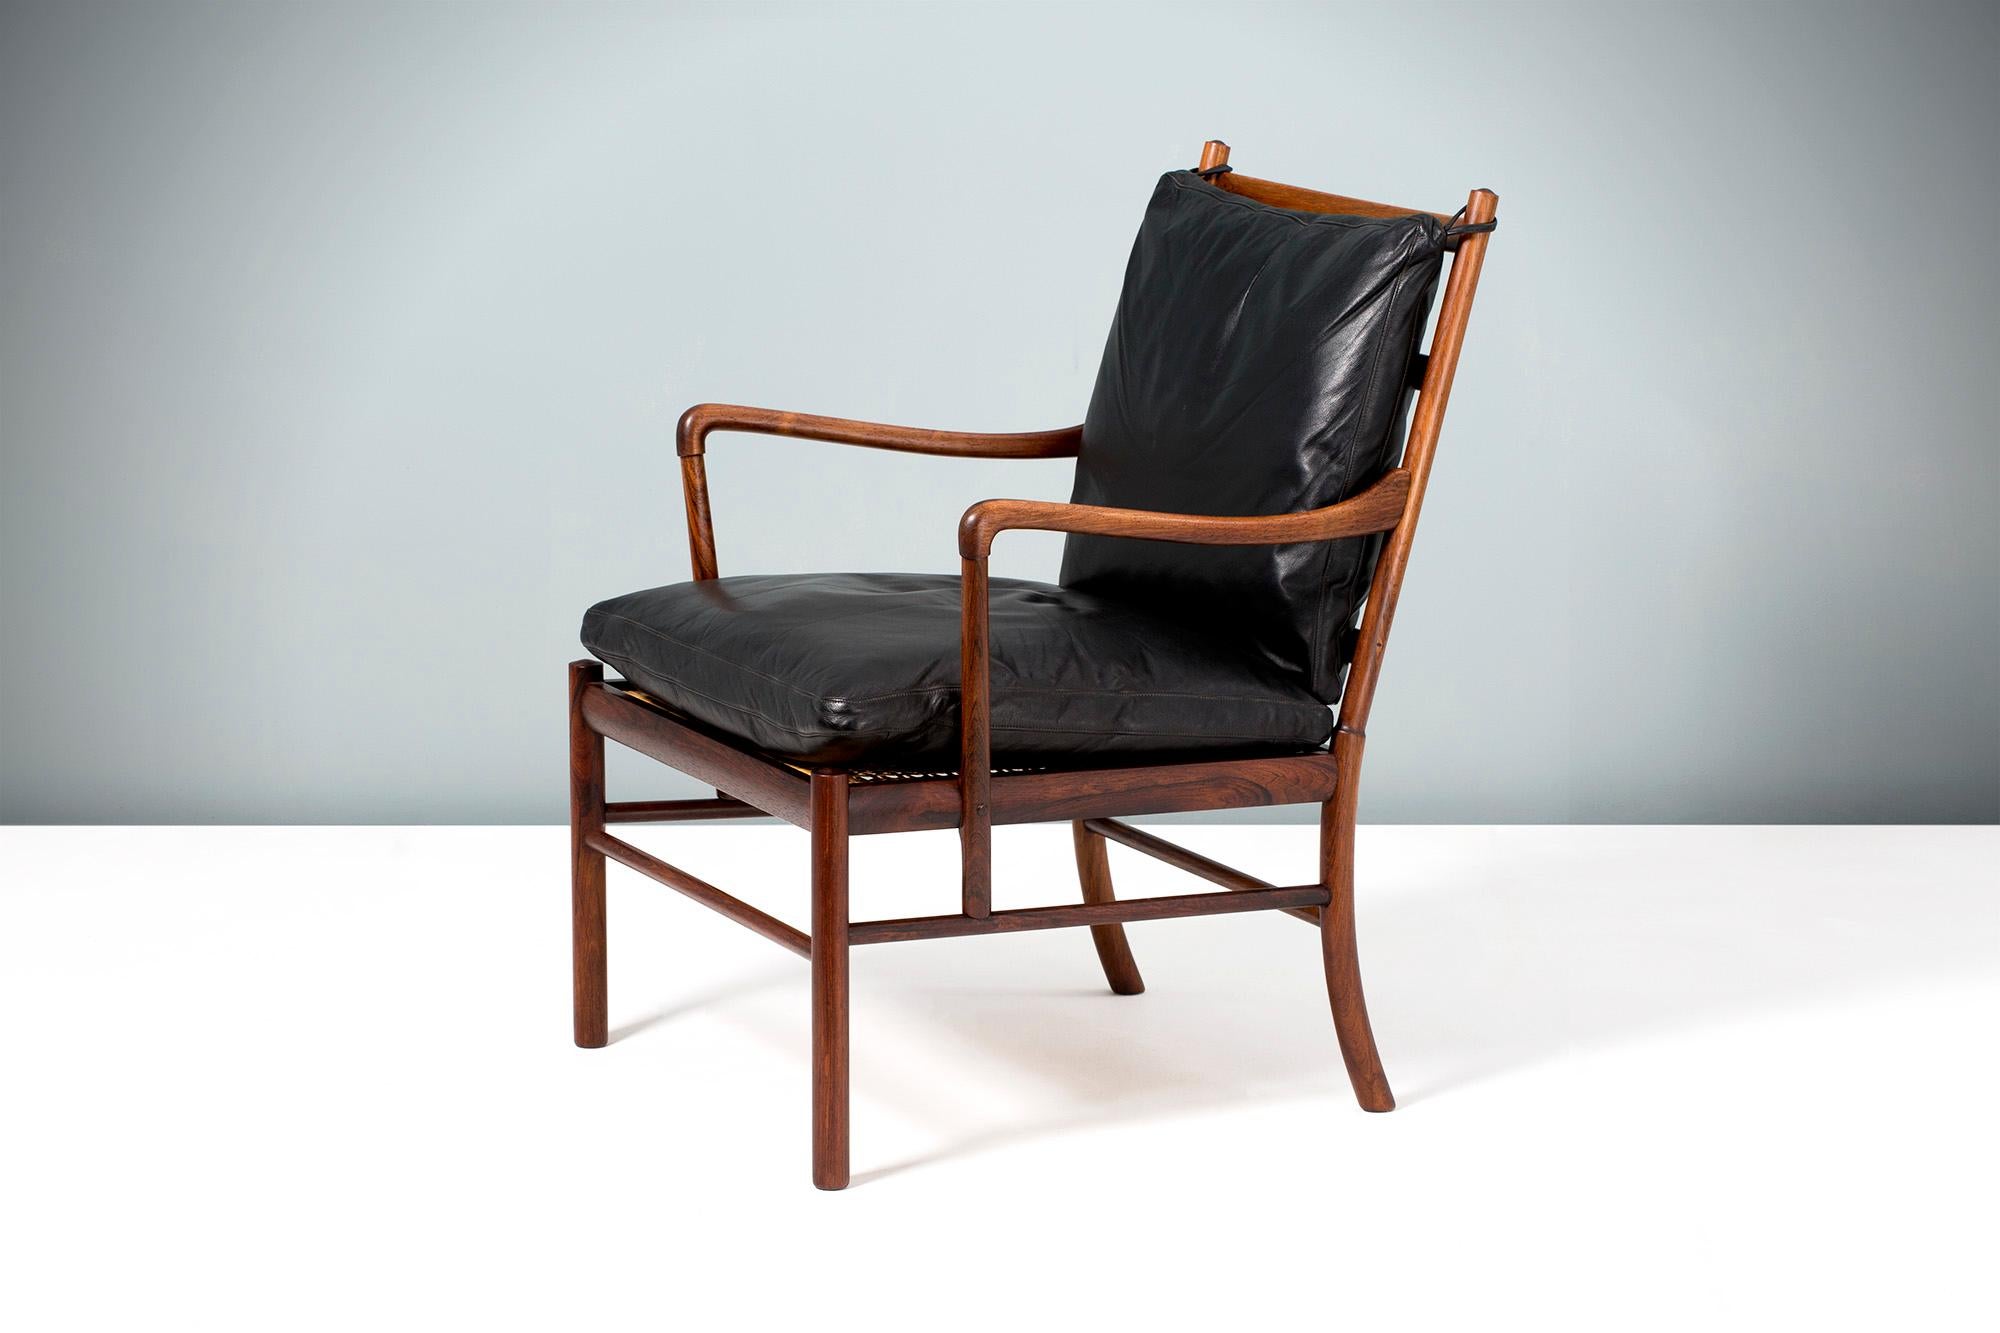 Ole Wanscher

PJ-149 Colonial chair, 1949

A fine pair of Ole Wanscher's most iconic design: The Colonial chair. Produced by Poul Jeppesen in Denmark circa 1950s in exquisite Brazilian rosewood with original woven rattan cane seat and original,